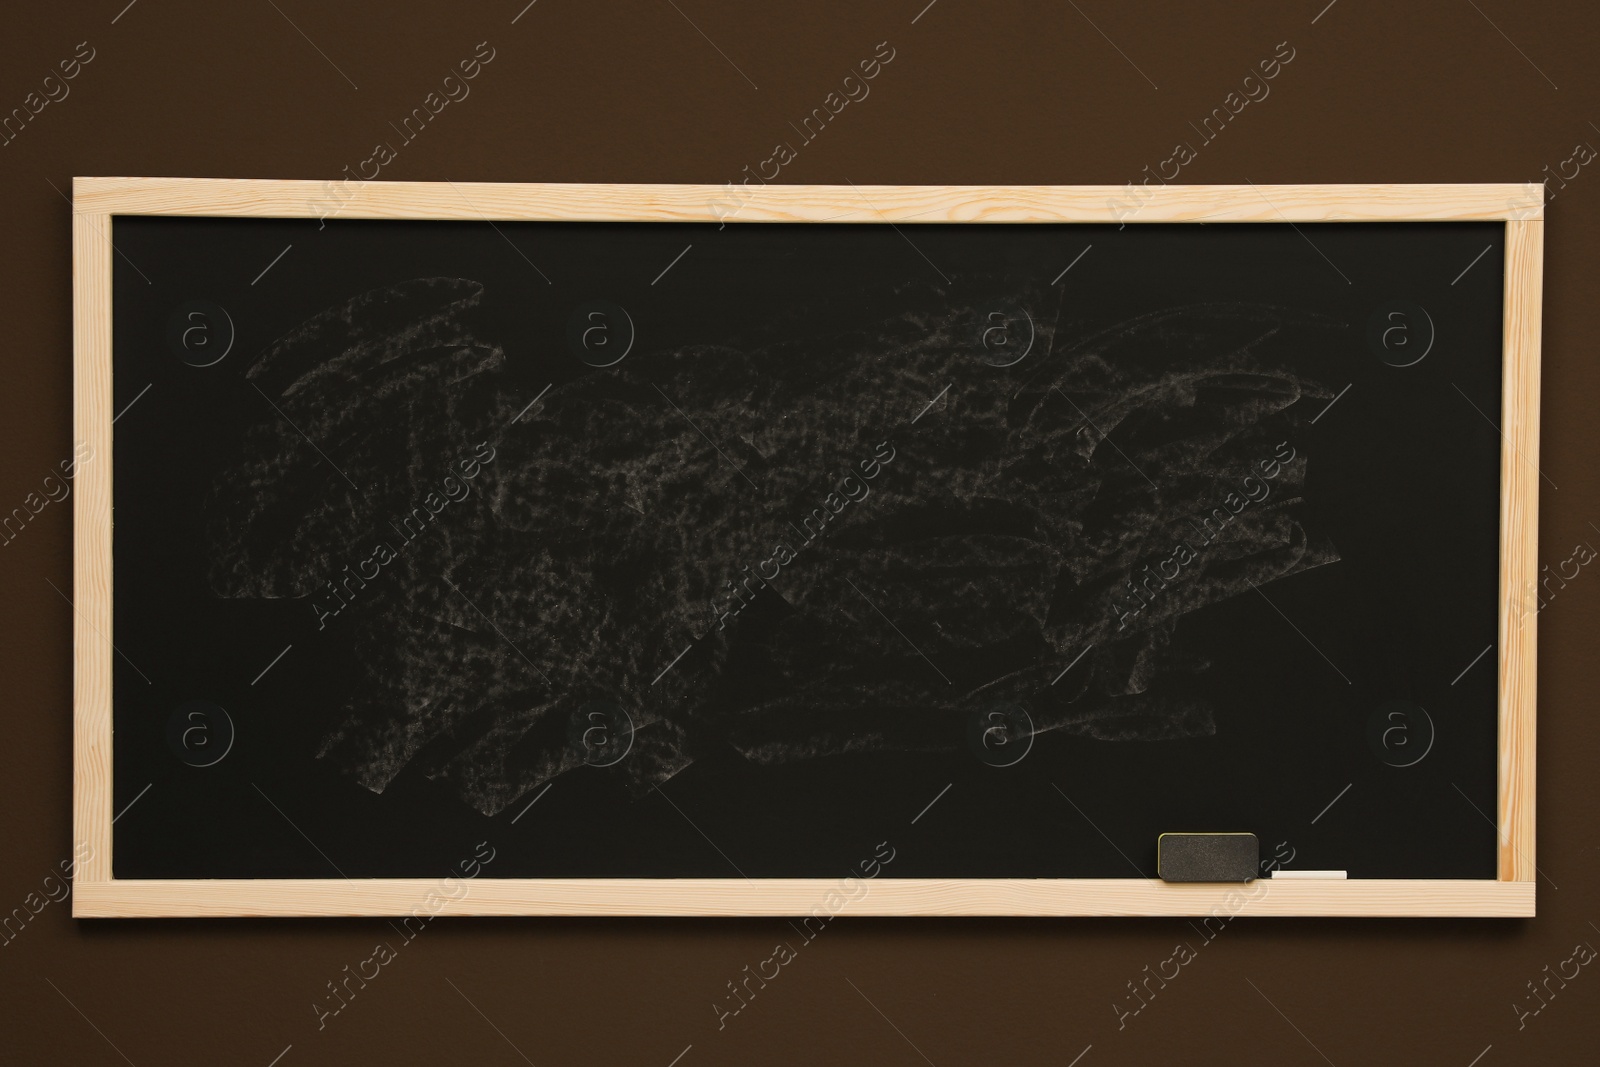 Photo of Dirty black chalkboard hanging on brown wall